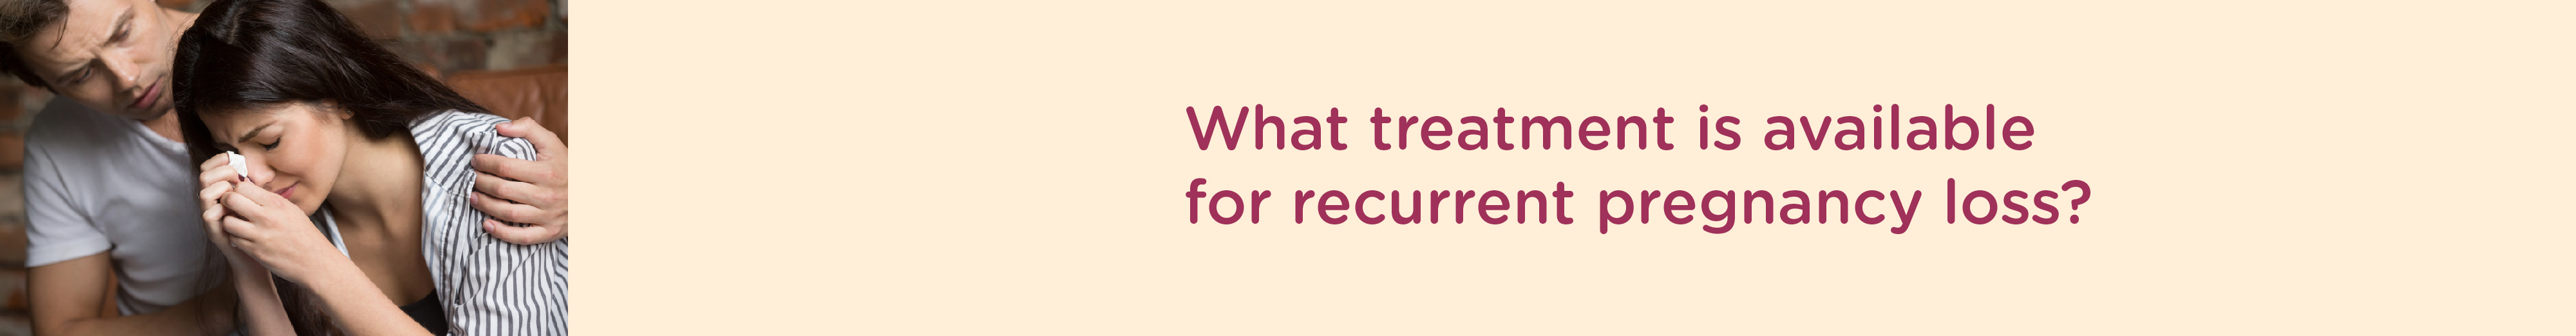 What Treatment is Available for Recurrent Pregnancy Loss?